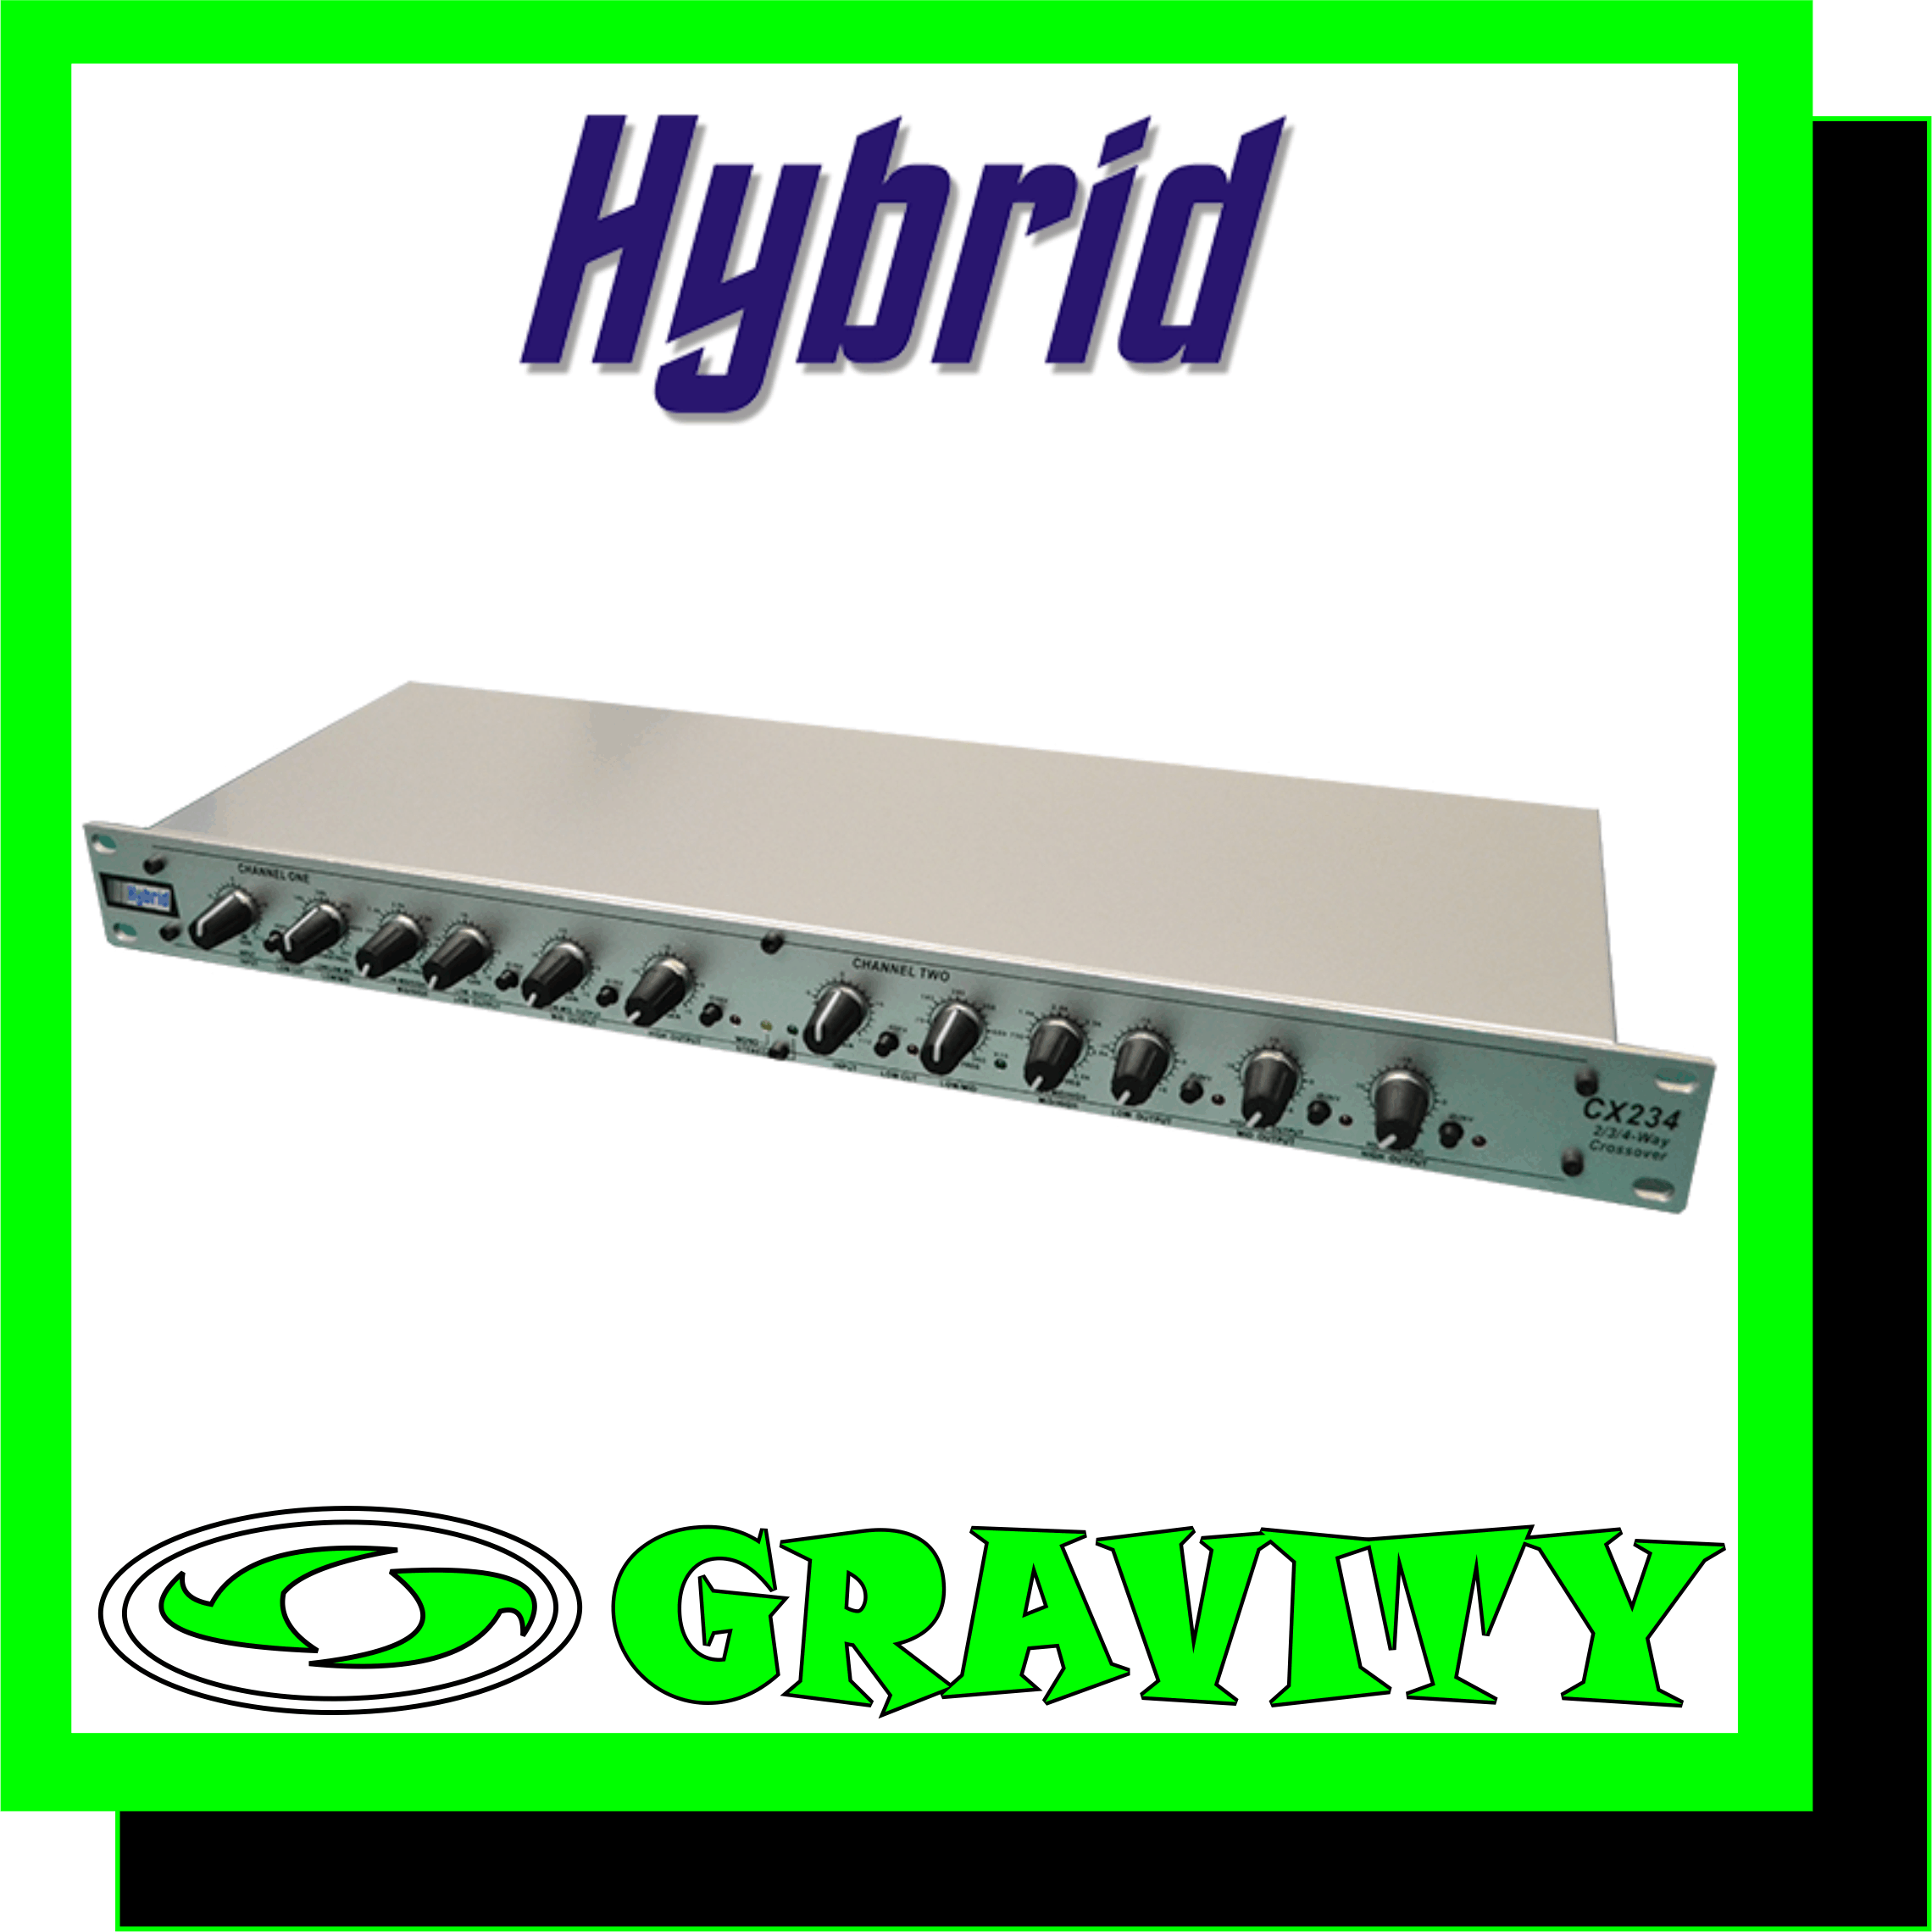 Hybrid CX234  -3-Way Stereo / 4-Way Mono, Active Crossover -24dB / Octave Linkwitz-Riley filters -Indivudual output level controls, for all bands -Individual phase reverse switches -Servo Bal XLR connectors for inputs & outputs